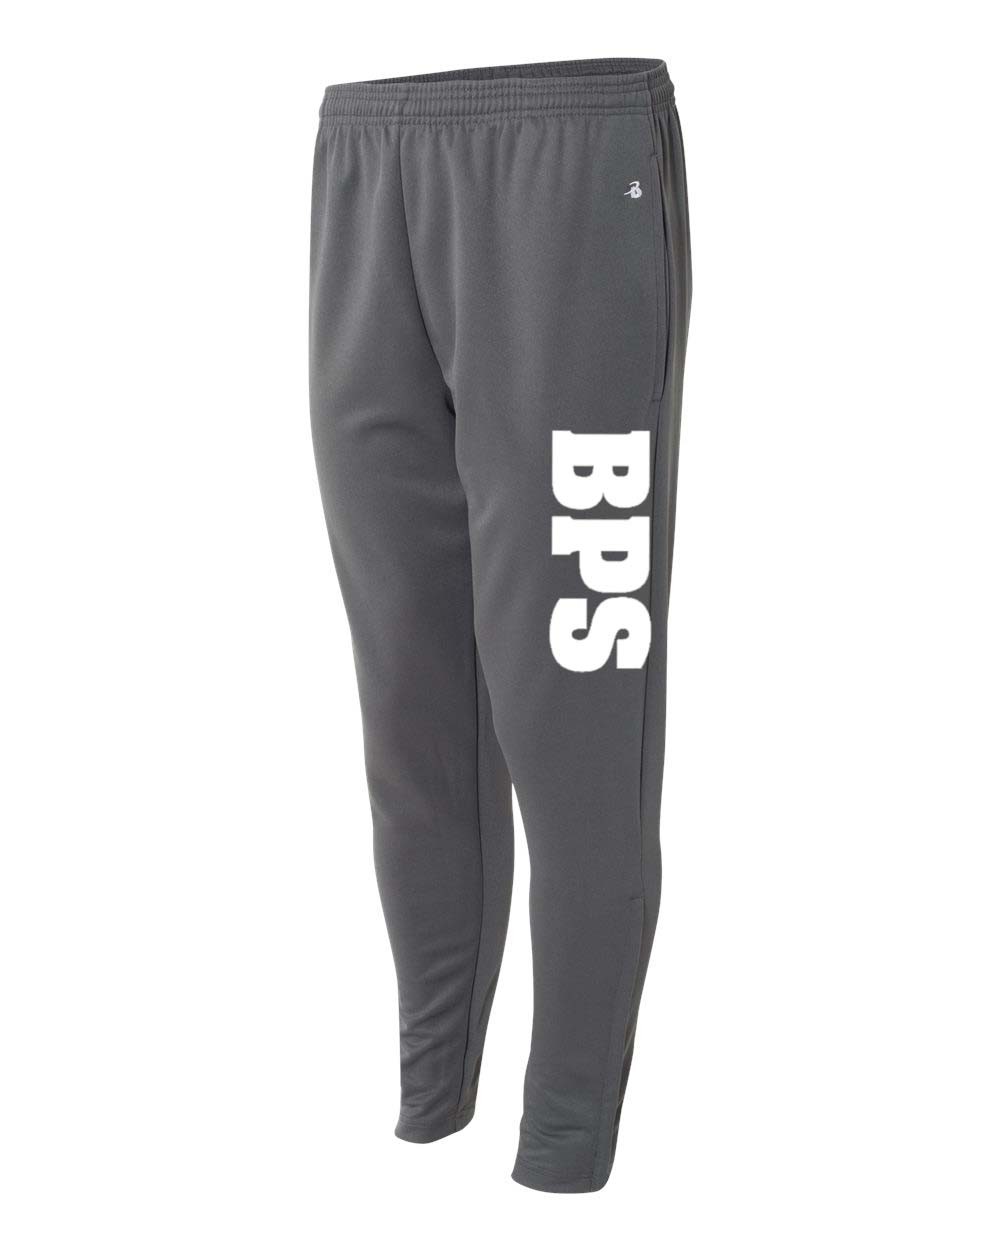 BPS Trainer Pants w/ White Logo - Please Allow 2-3 Weeks for Delivery